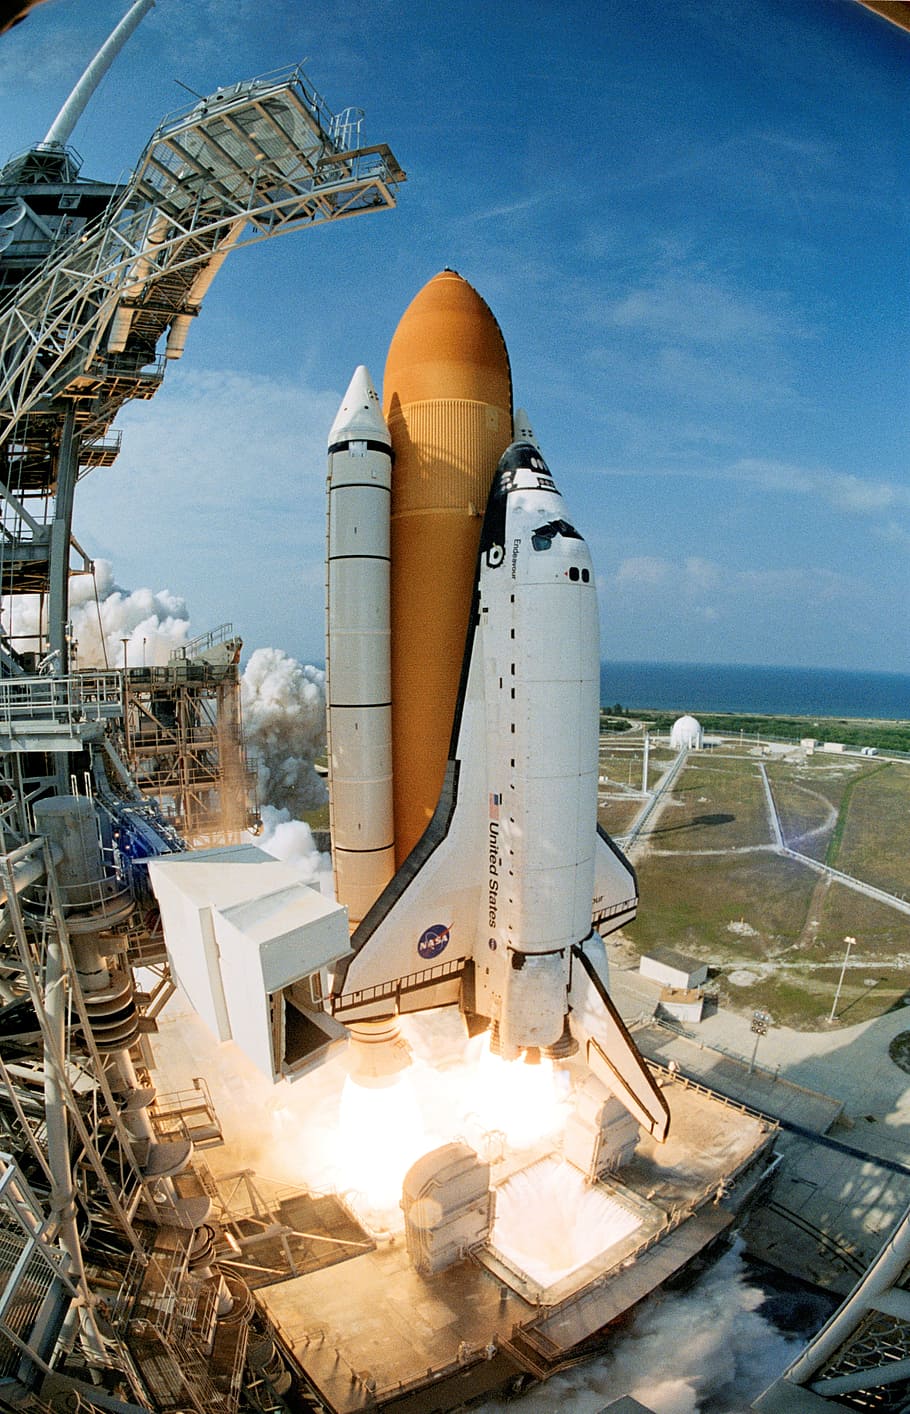 Space Shuttle, Launch, Endeavour, space shuttle launch, kennedy space center, rocket, spacecraft, industry, space, freight transportation